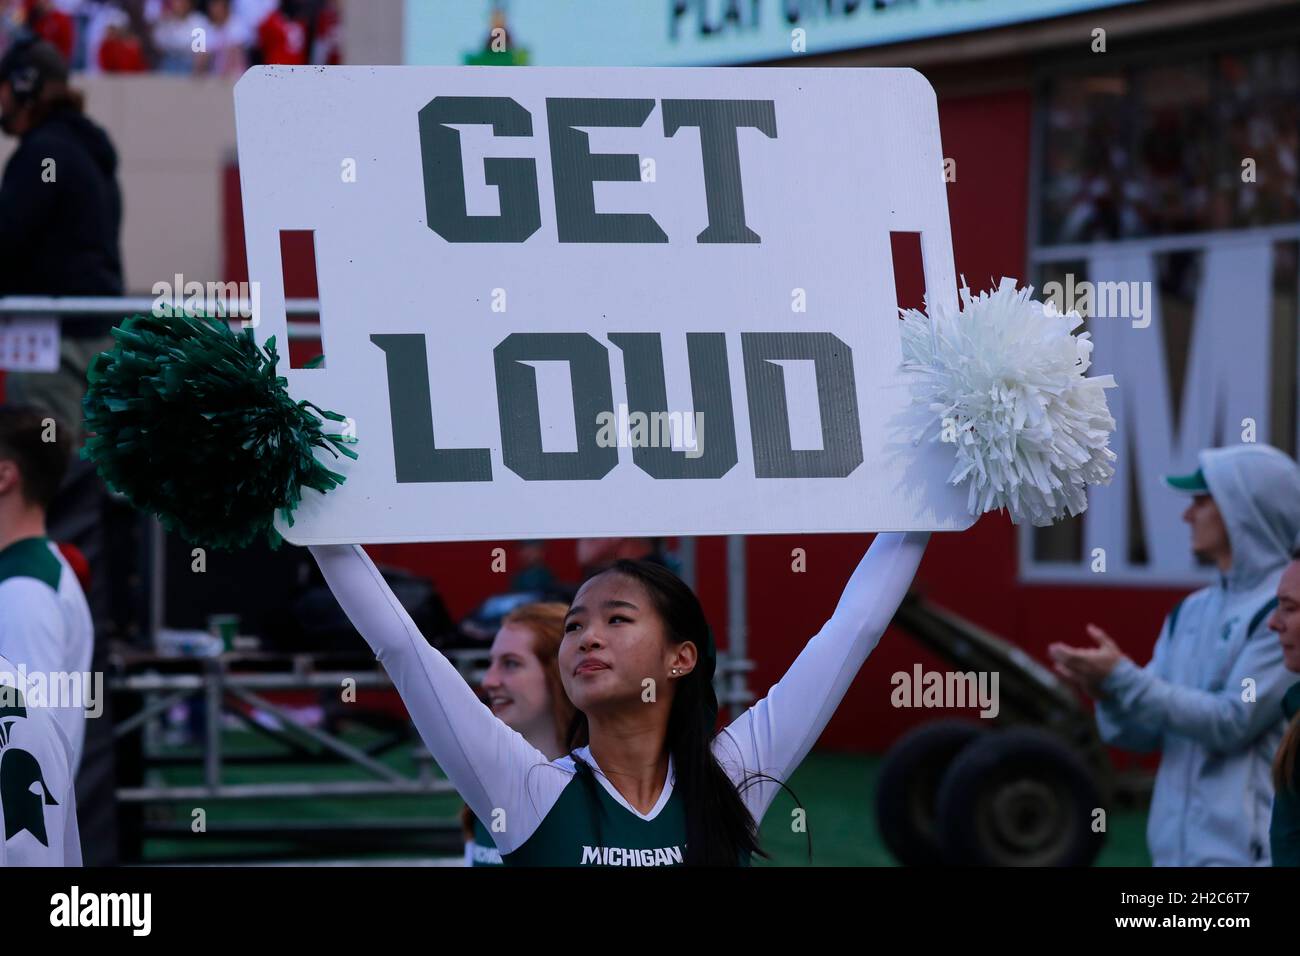 Bloomington, United States. 16th Oct, 2021. Michigan State cheerleaders cheer for the Spartans during an NCAA game against Indiana University at Memorial Stadium in Bloomington. (Ind. IU lost to Michigan State 20-15) Credit: SOPA Images Limited/Alamy Live News Stock Photo